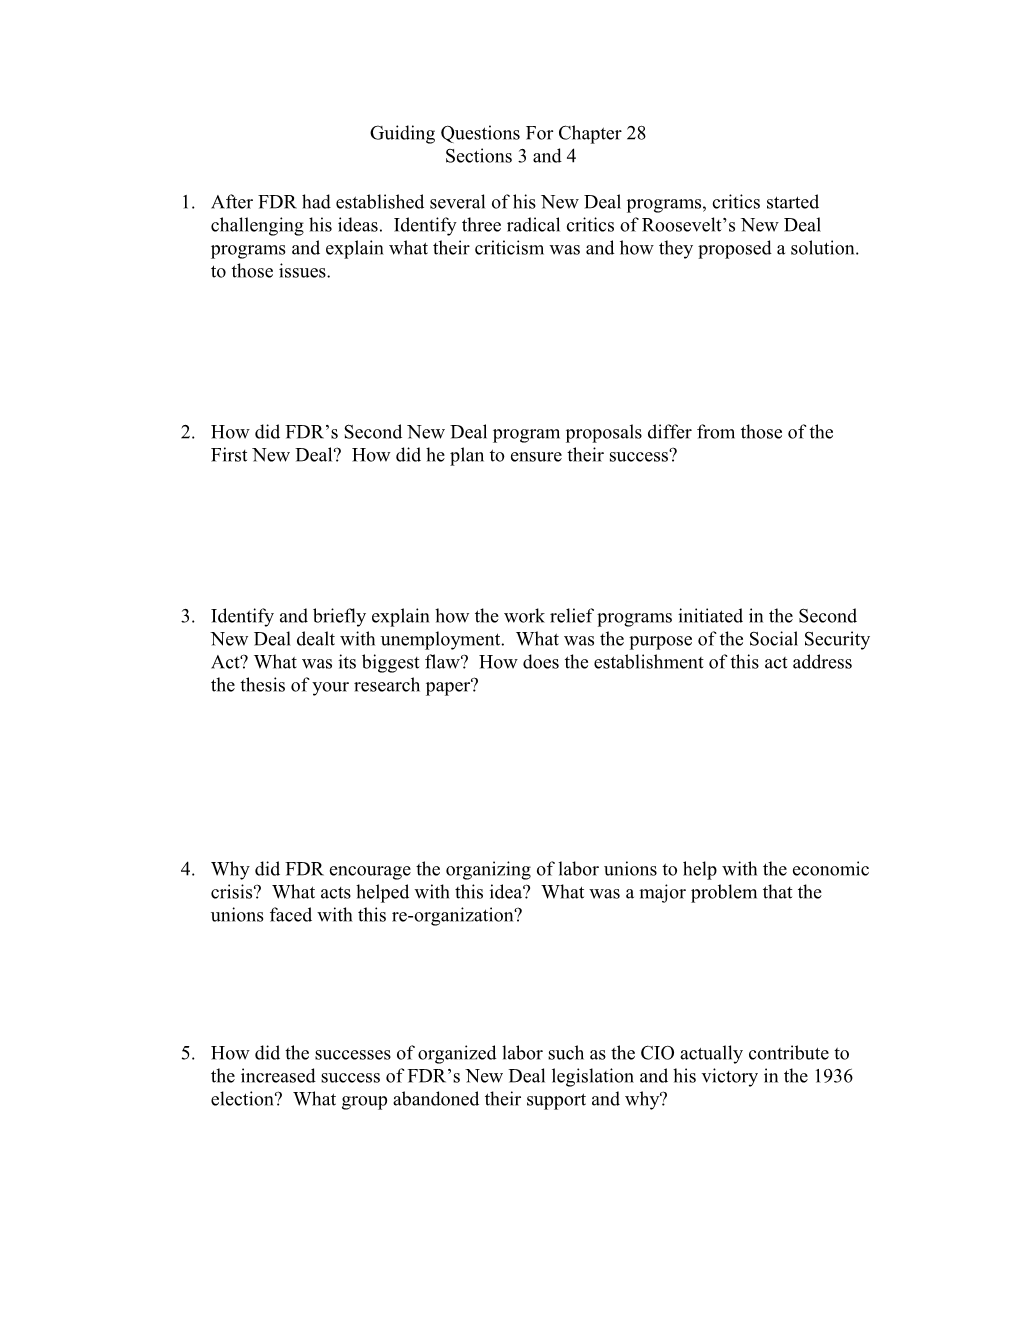 Guiding Questions for Chapter 28